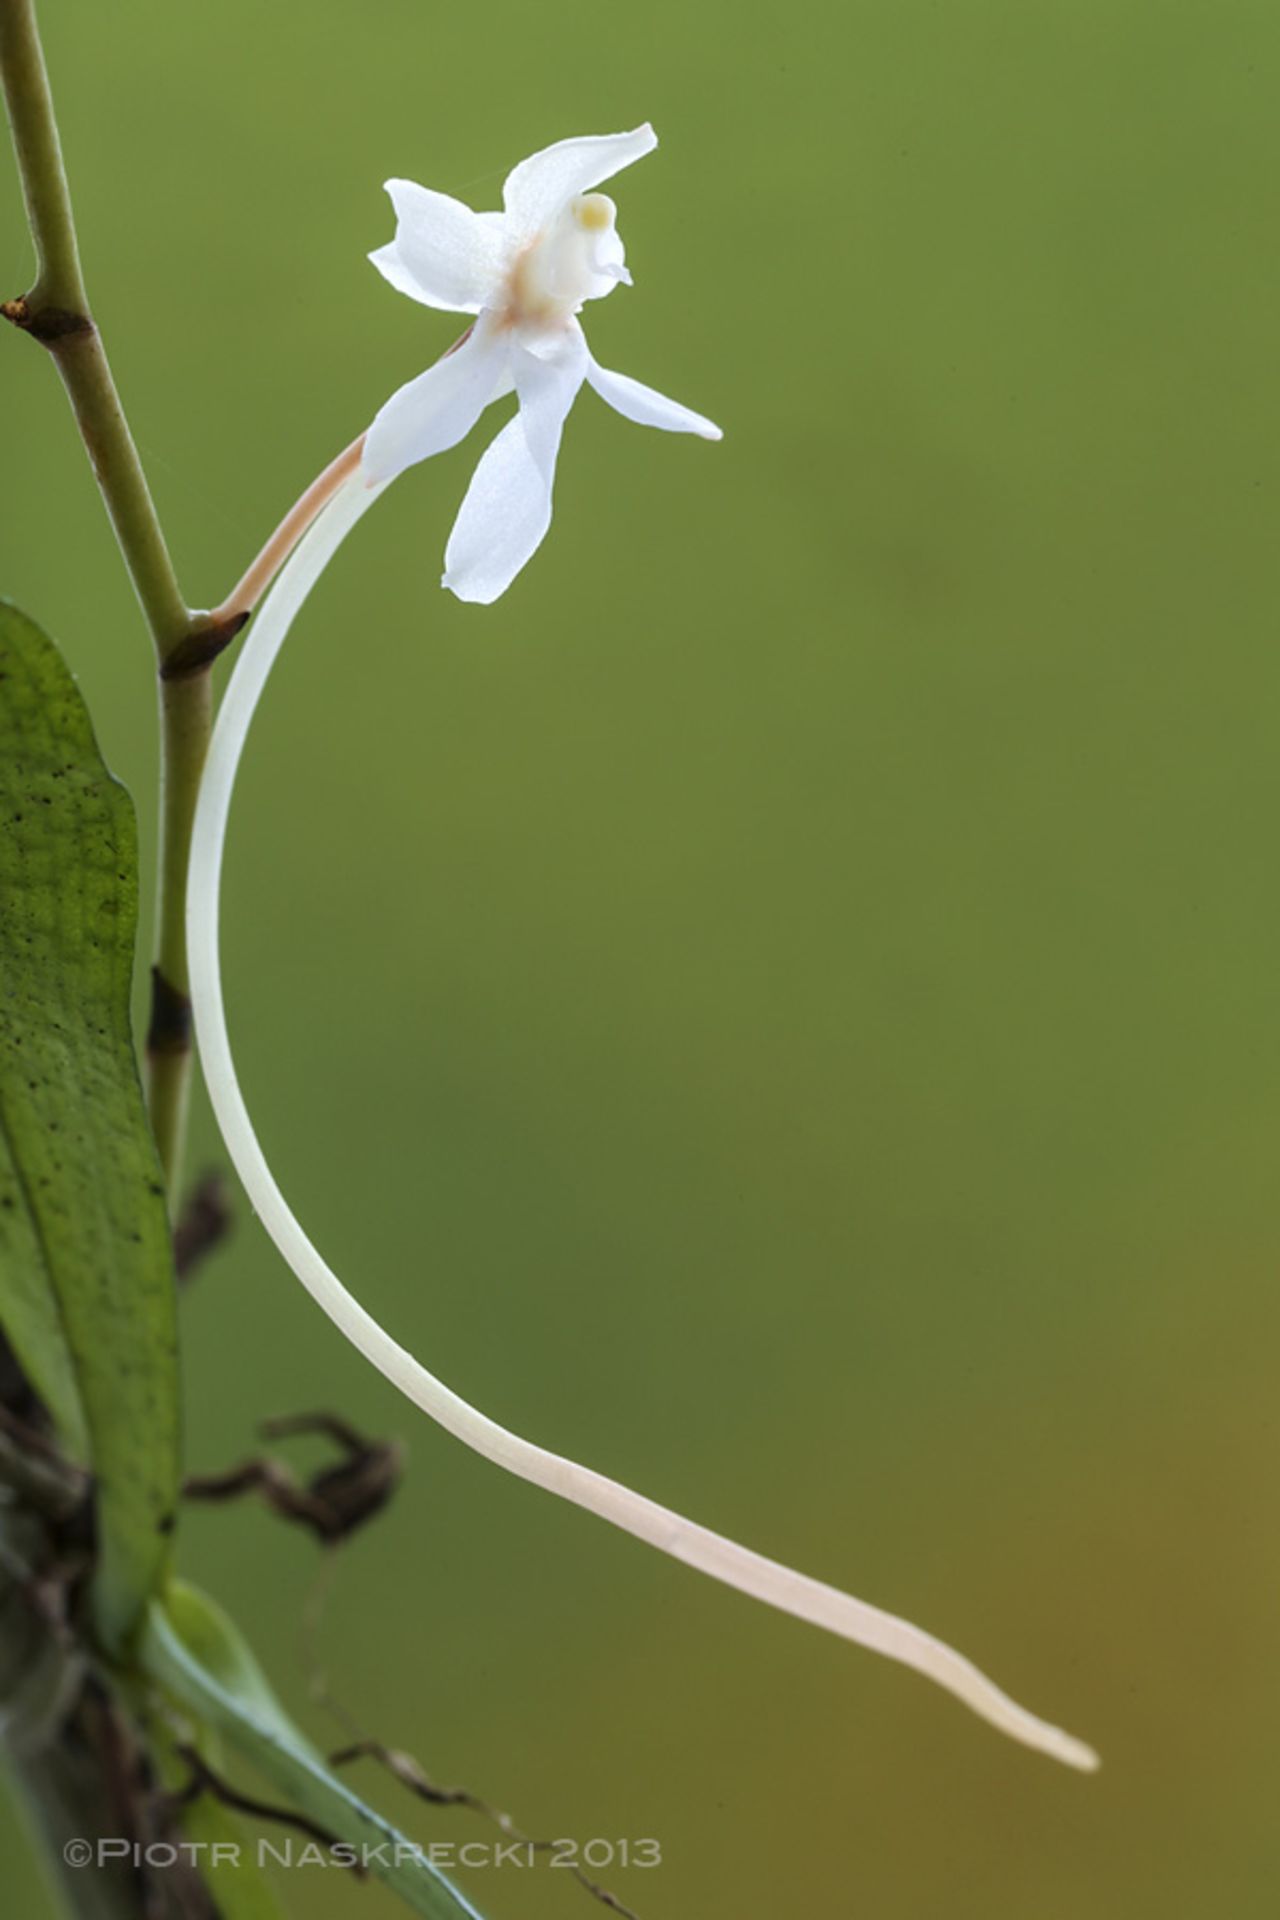 During their four-week expedition, the scientists documented at least 1,200 species of animals and plants on the Cheringoma Plateau. Here, a tree orchid (Aerangis mystacidii), one of the 17 species of orchids found on the Cheringoma Plateau.